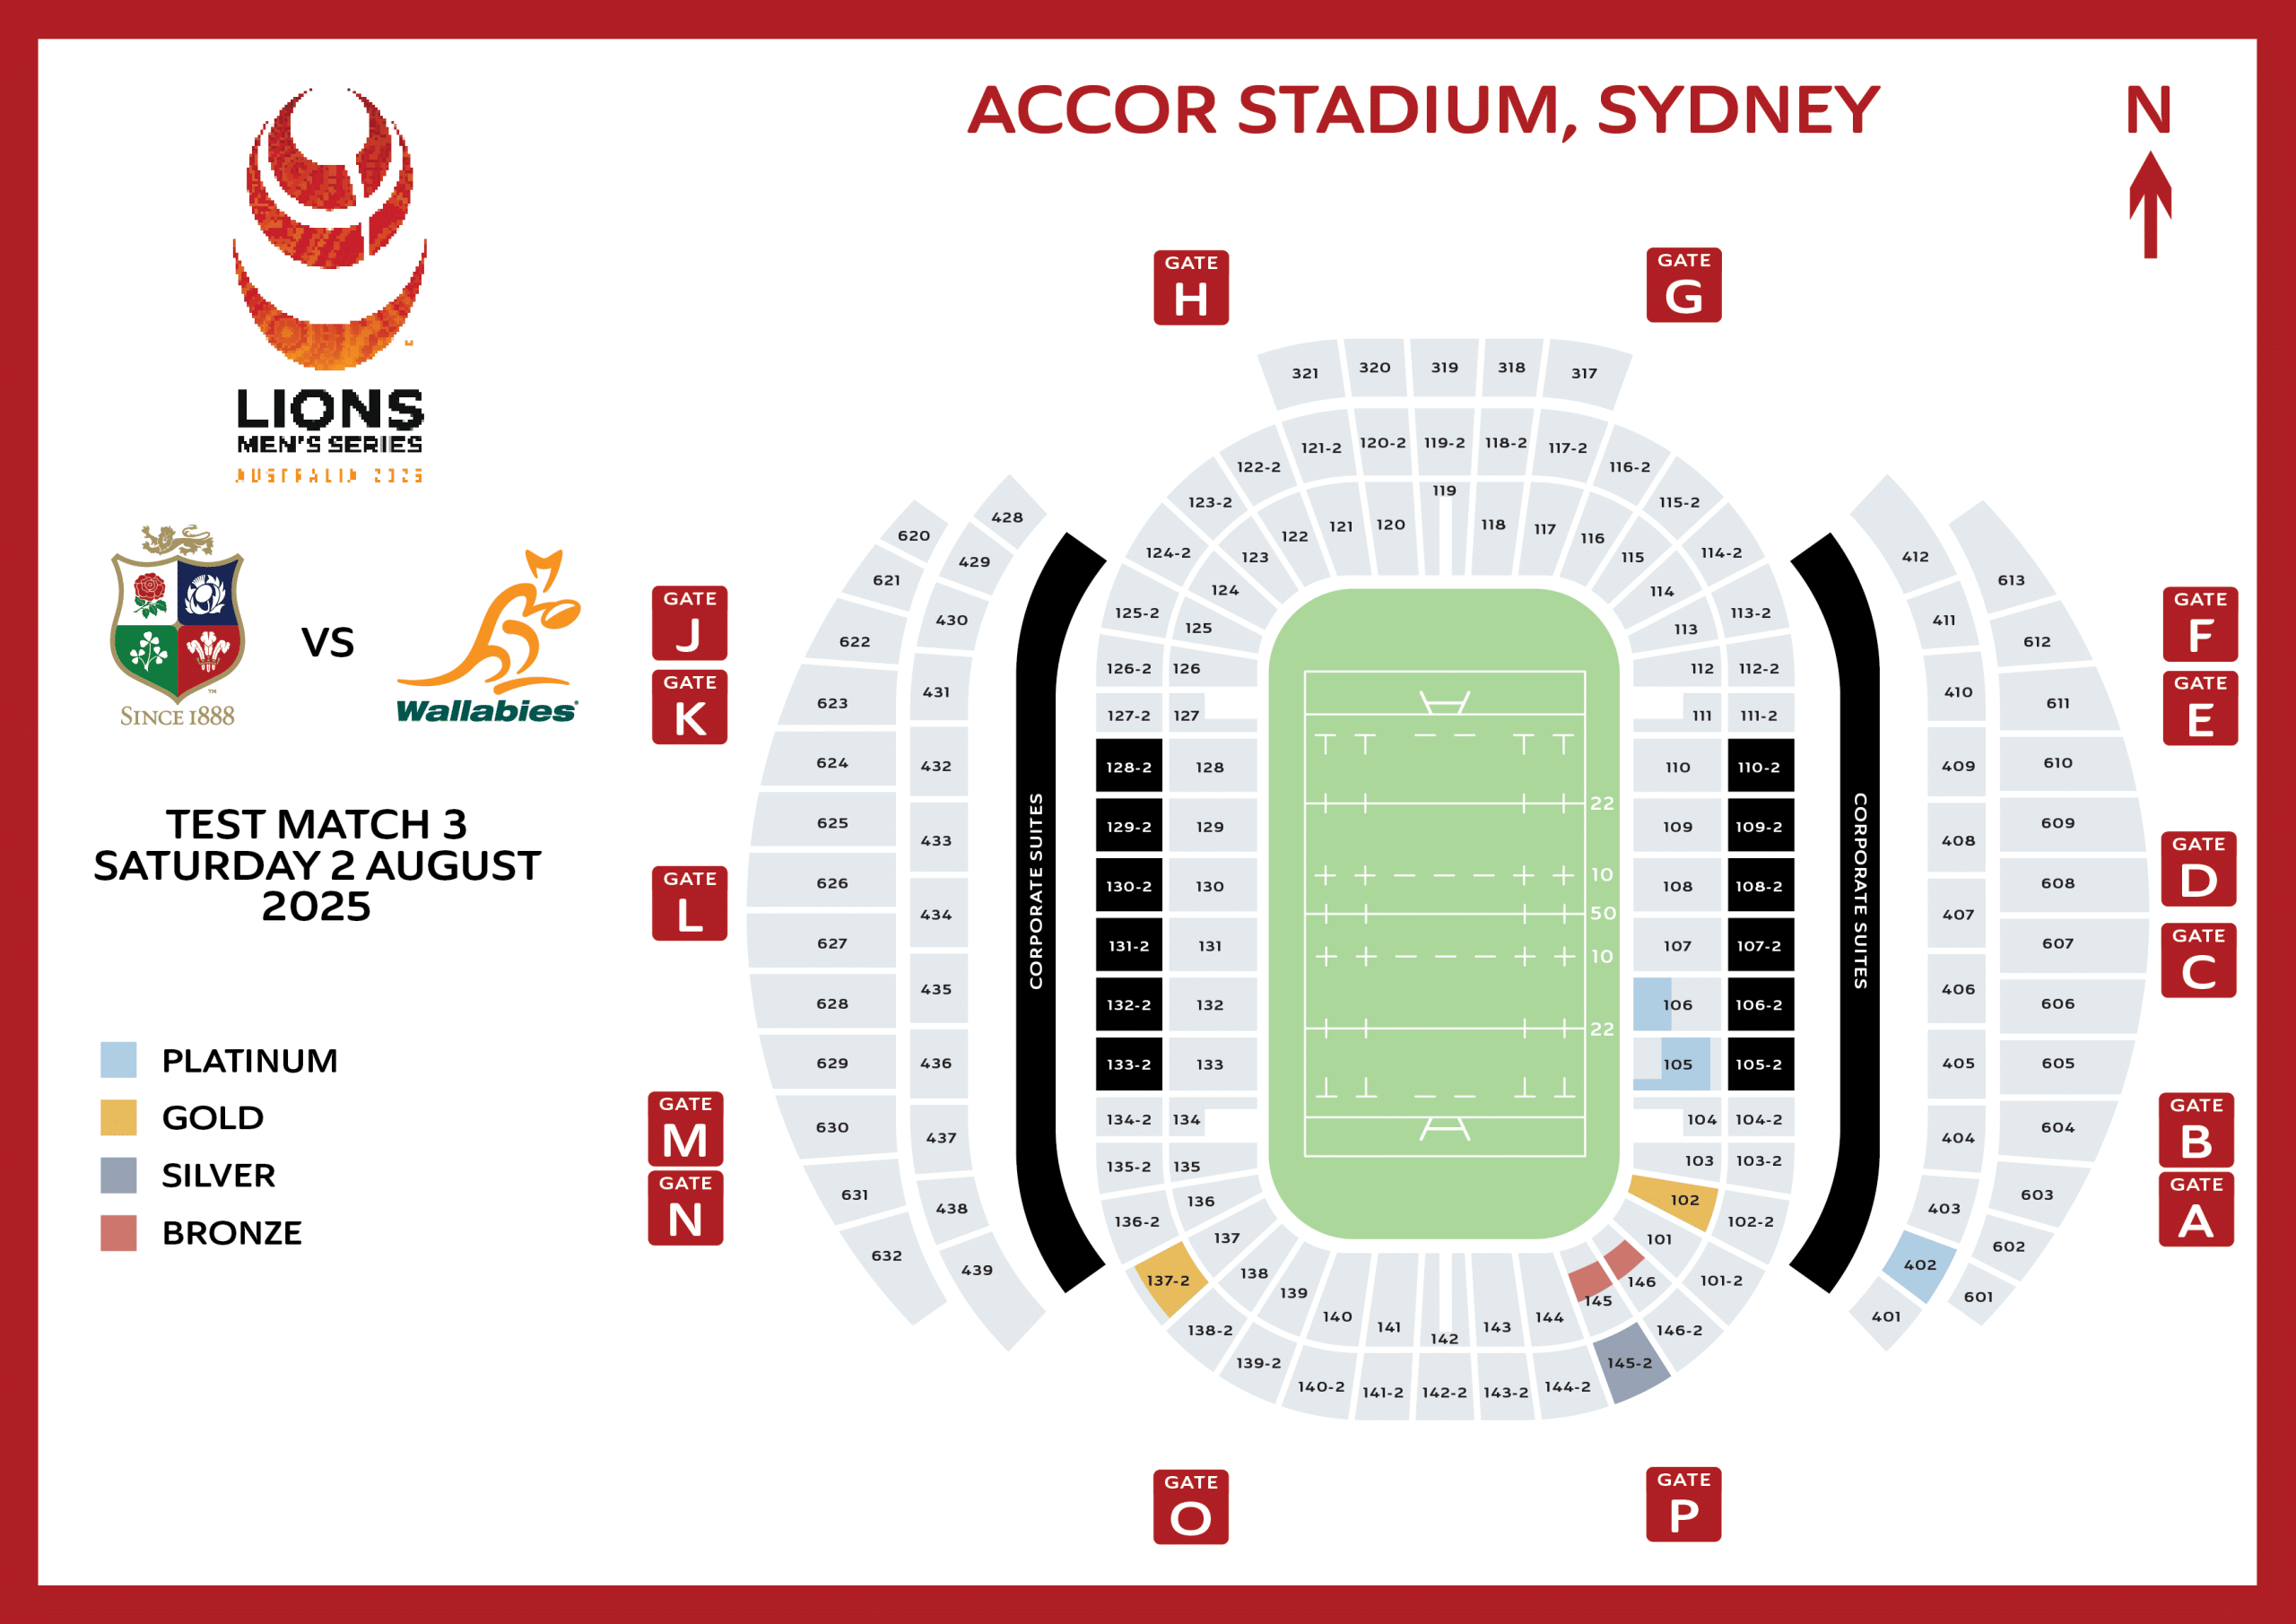 Lions Tour 2025, Test Match 3 in Sydney — Accor Stadium Seating Map